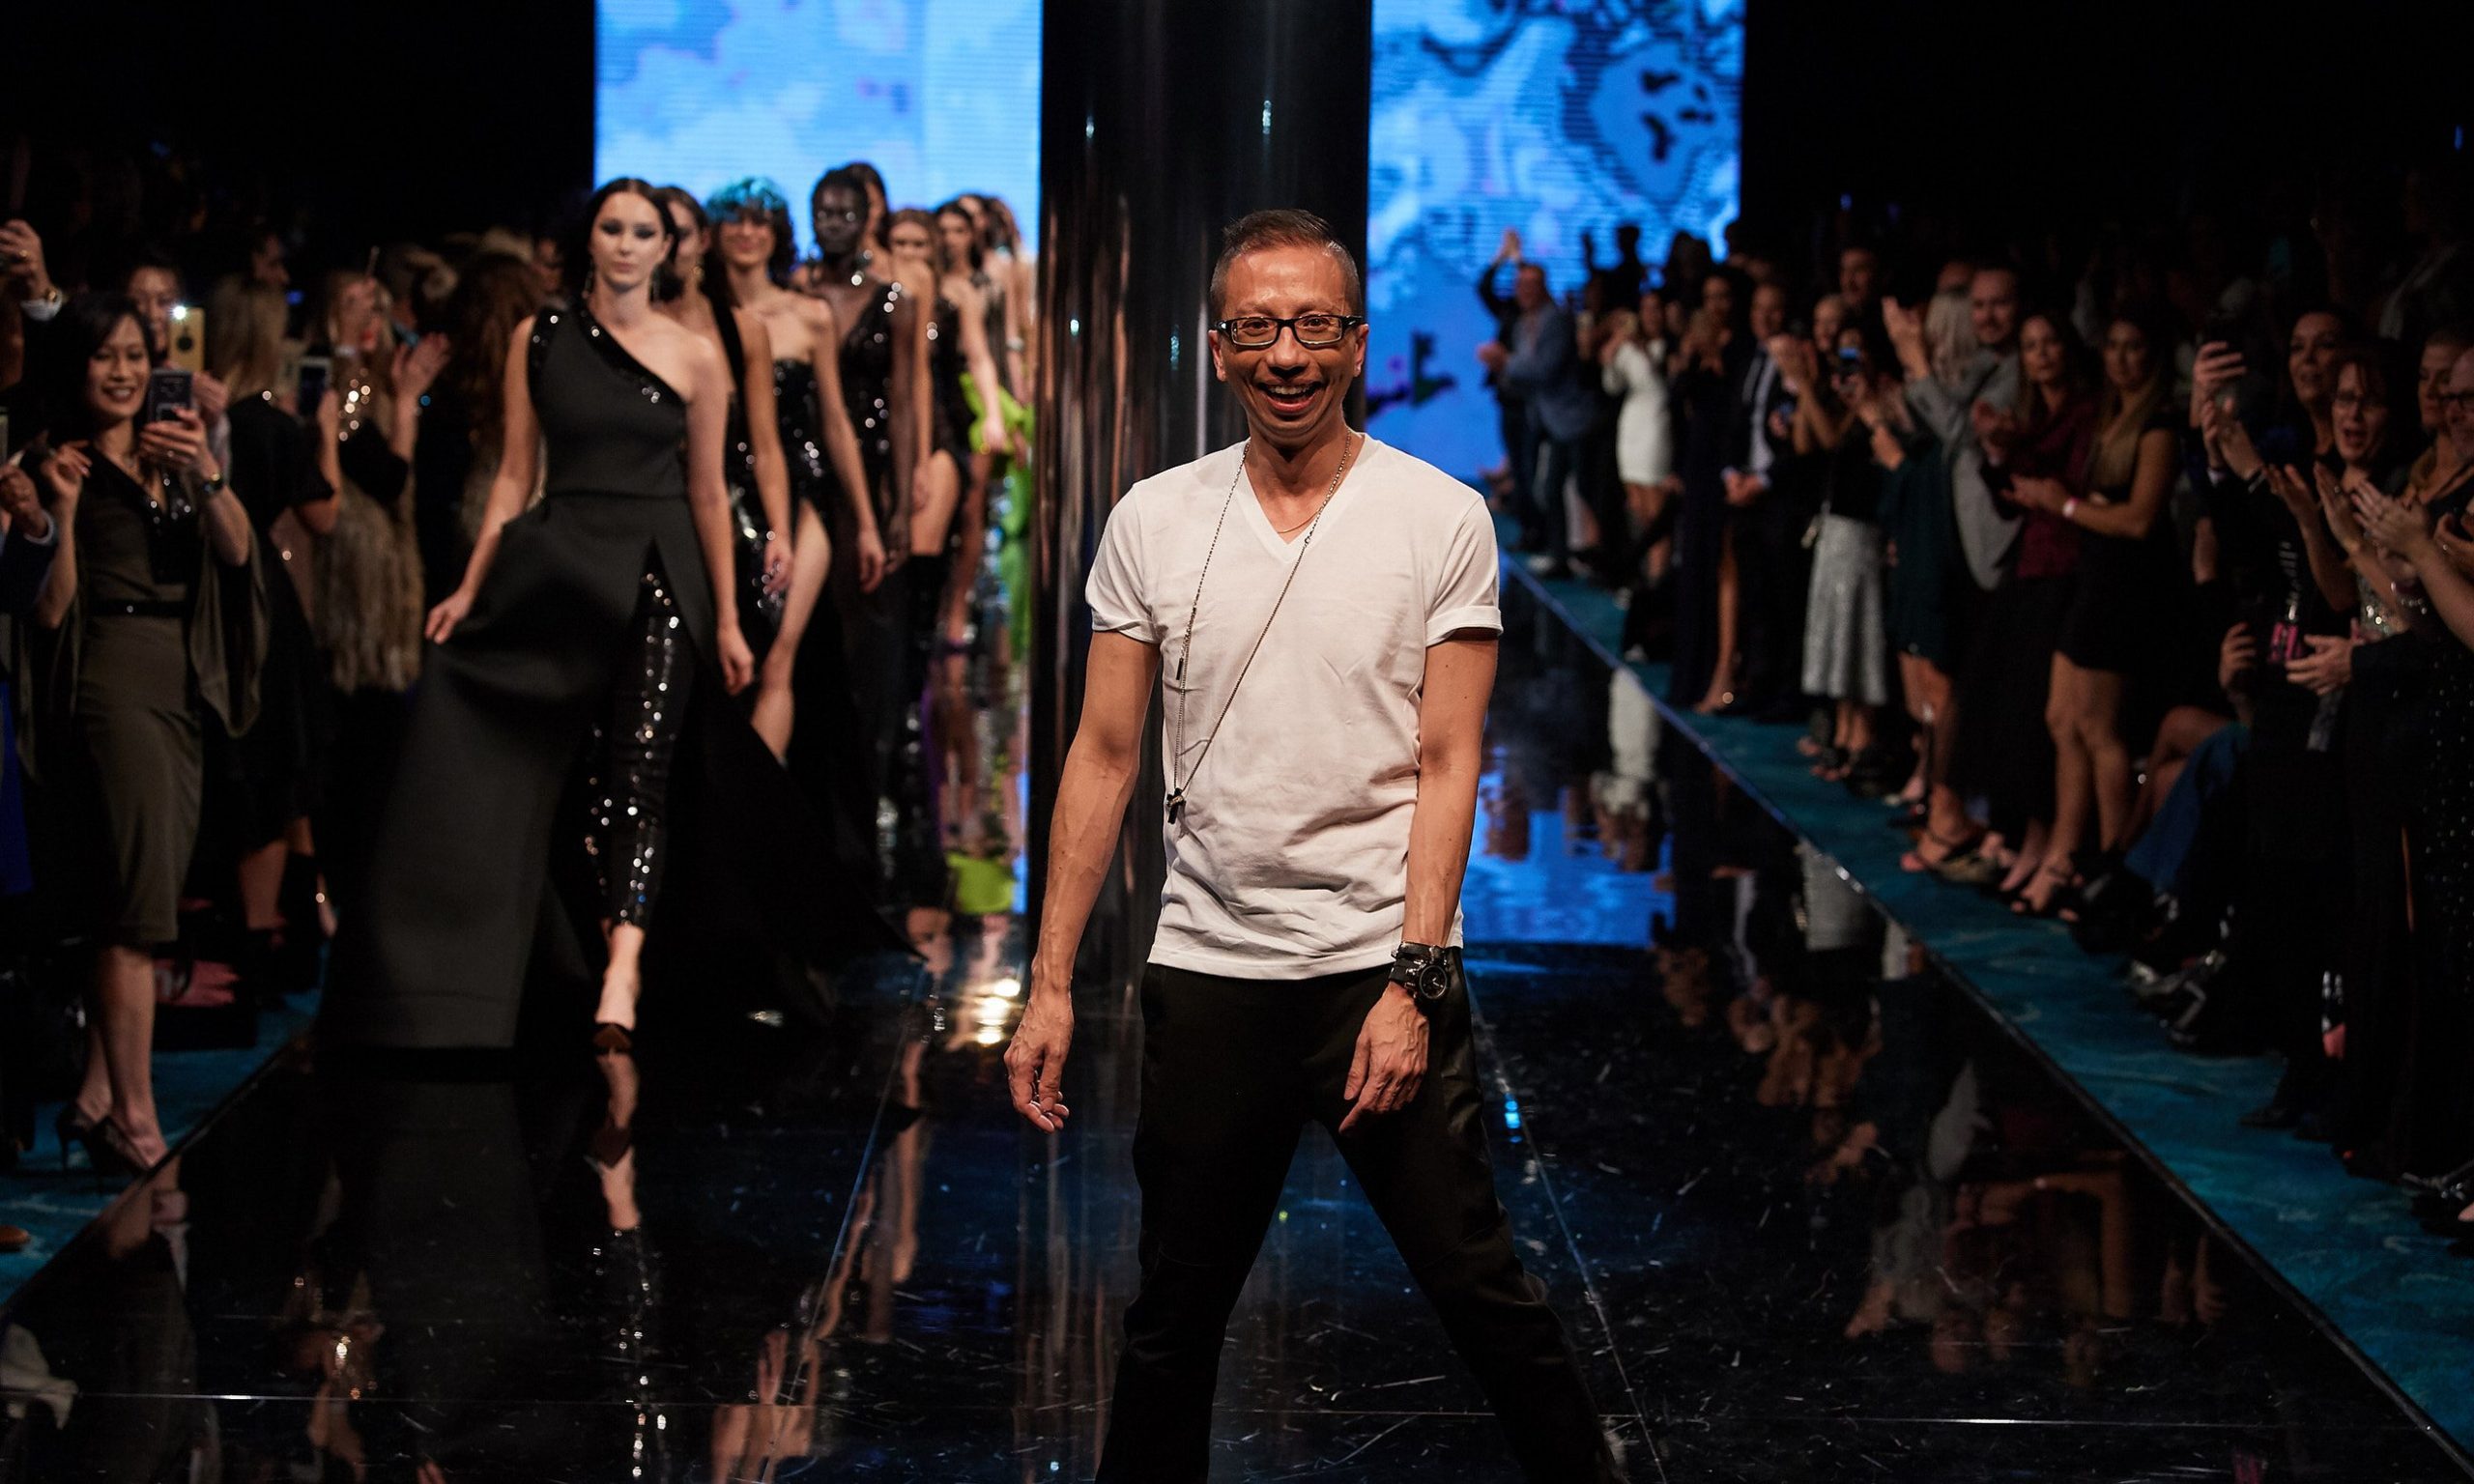 Designer Alvin Fernadez takes a bow on the ae'lkemi Runway at TPFF